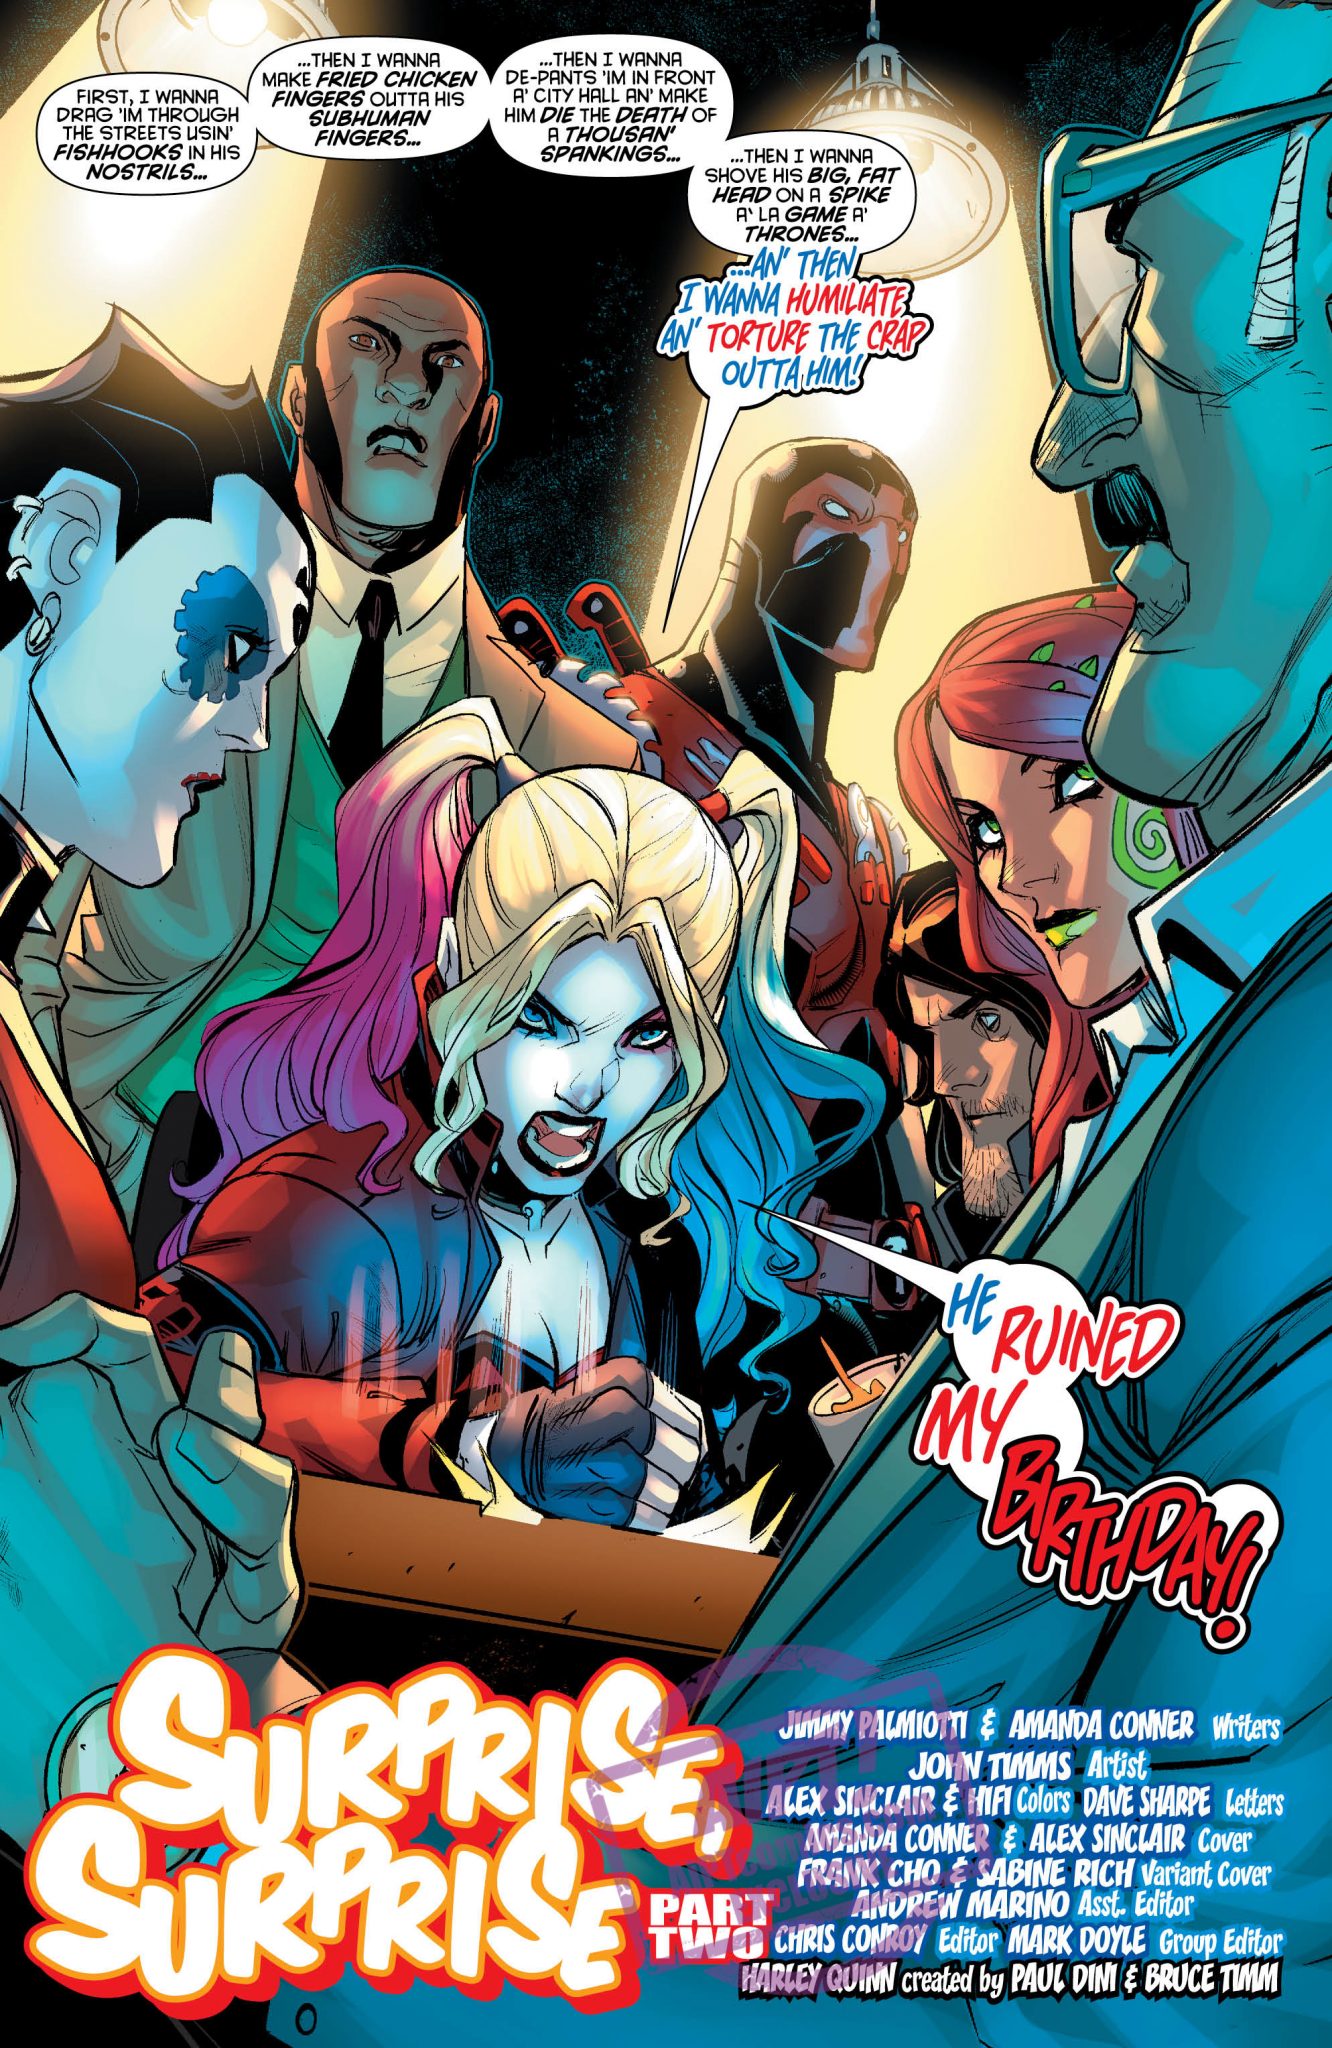 [EXCLUSIVE] DC Preview: Harley Quinn #26